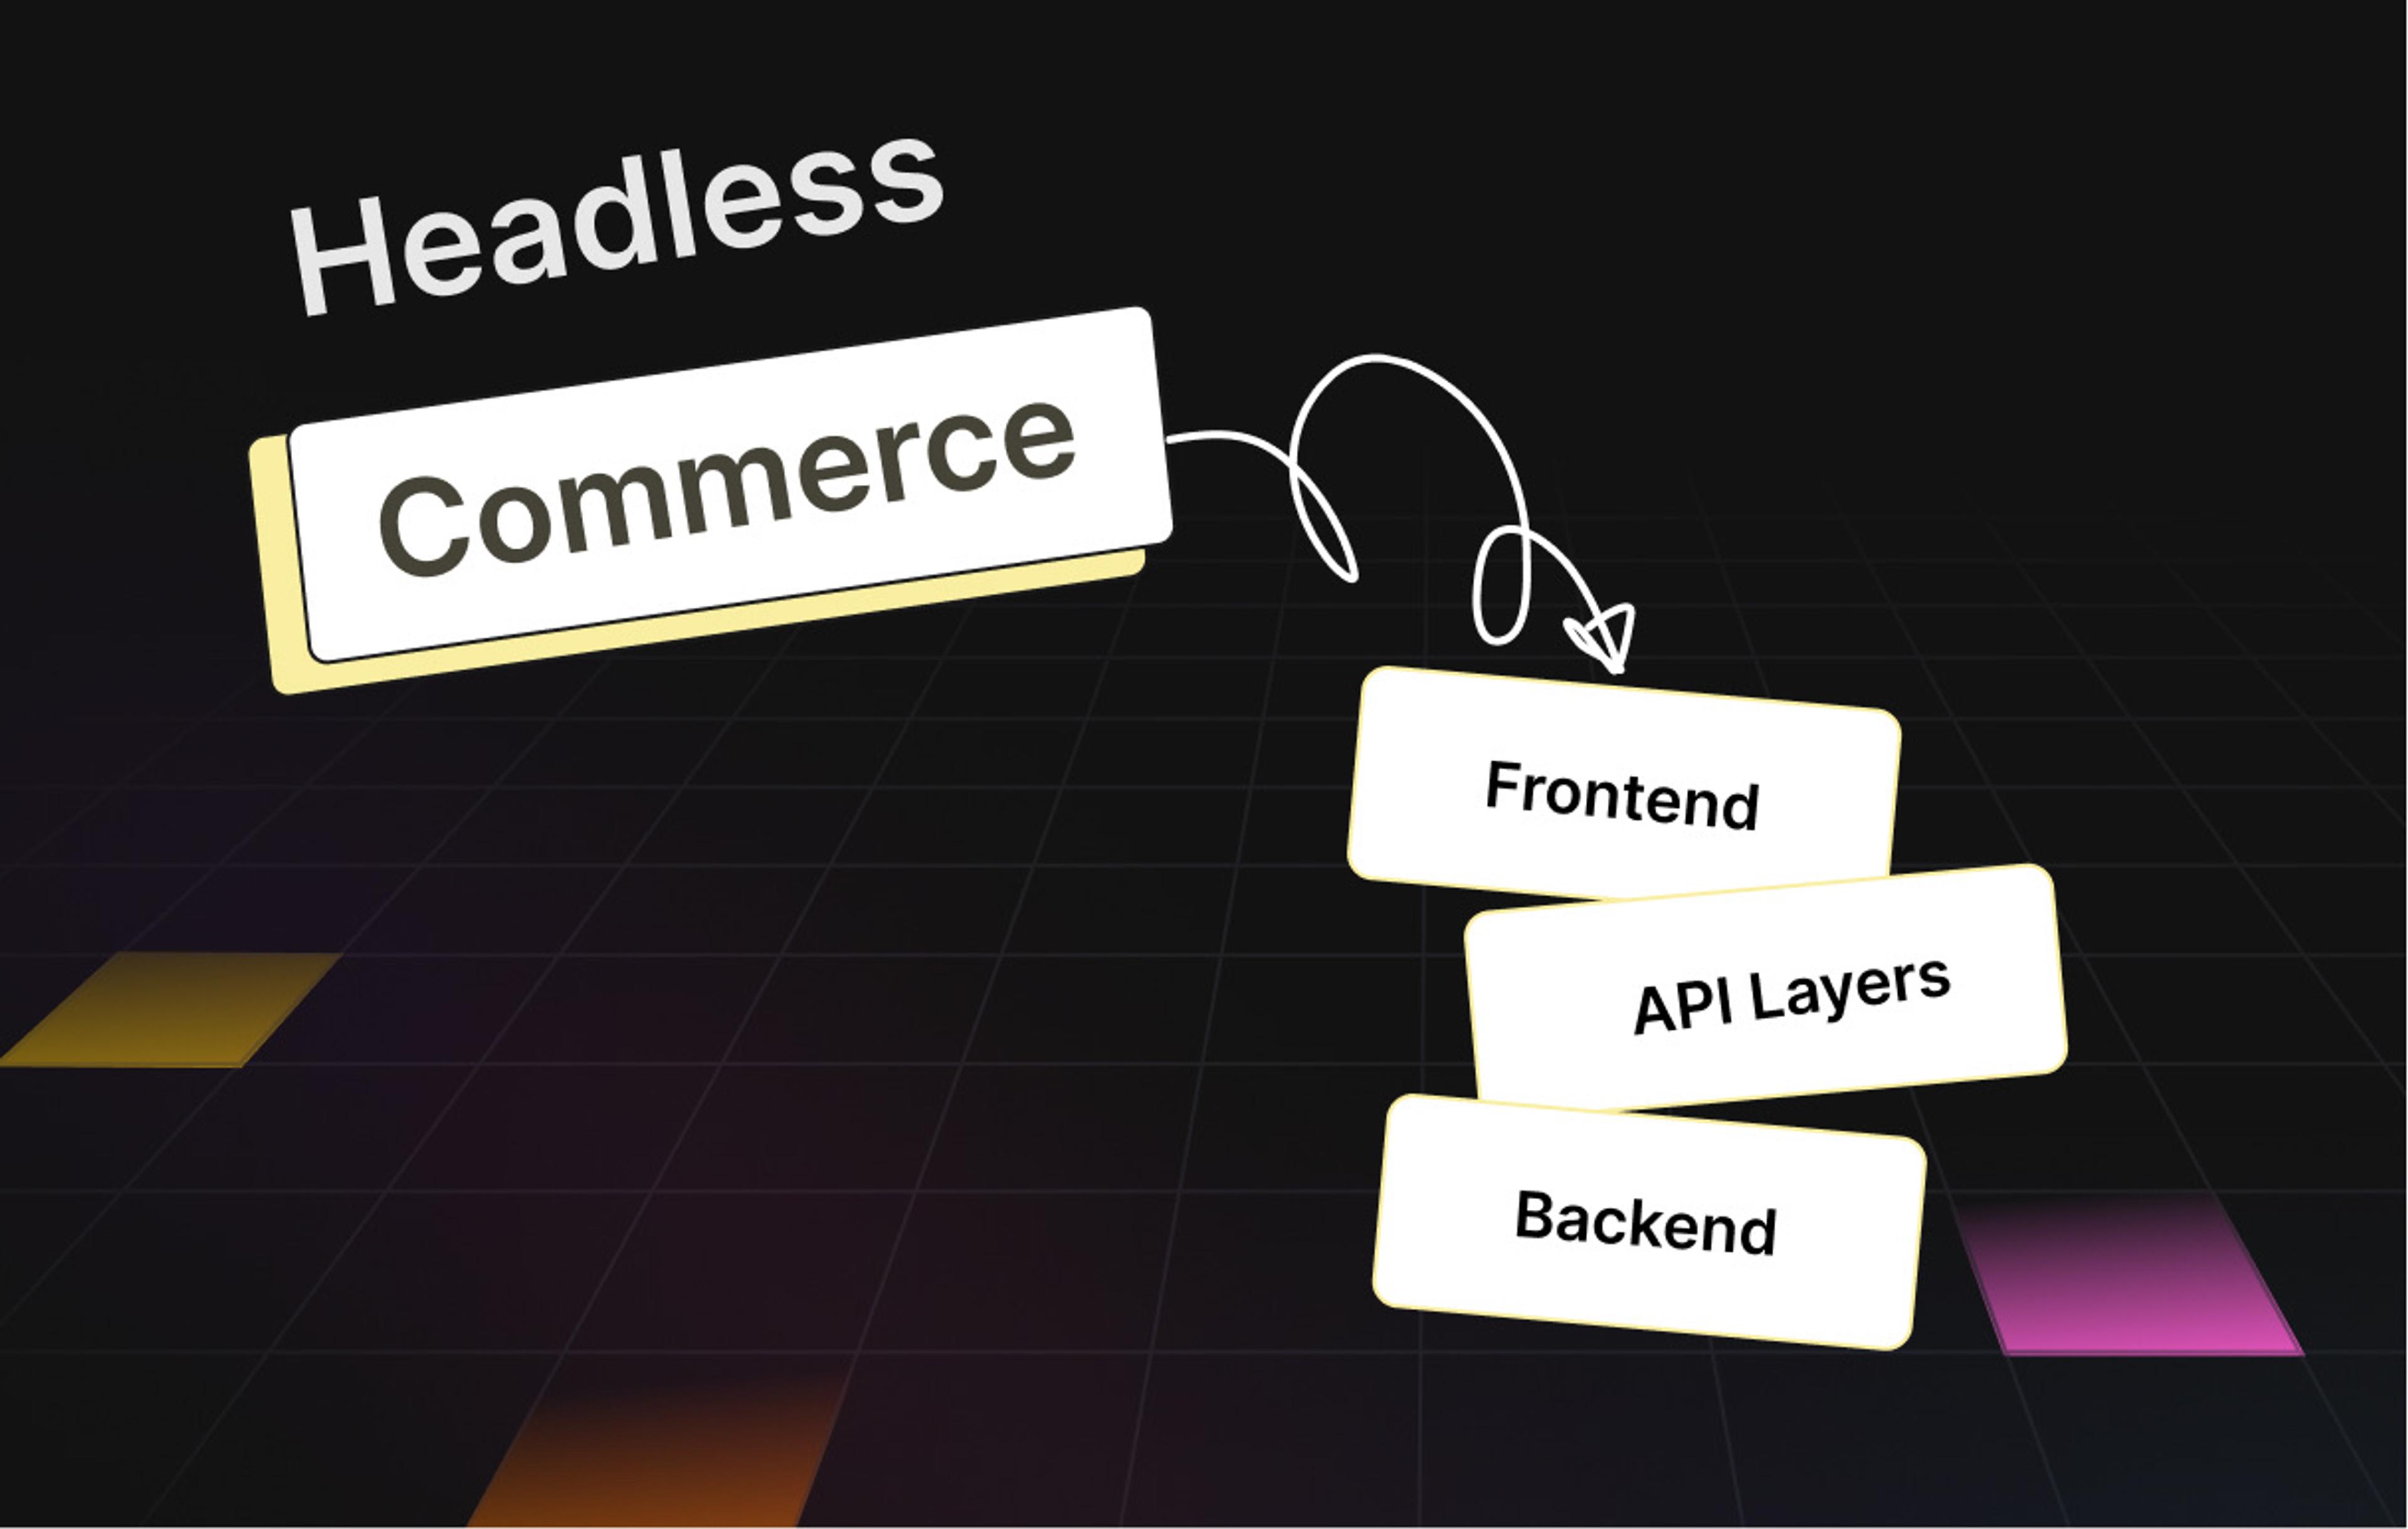 Why should eCommerce brands move to Headless Commerce?